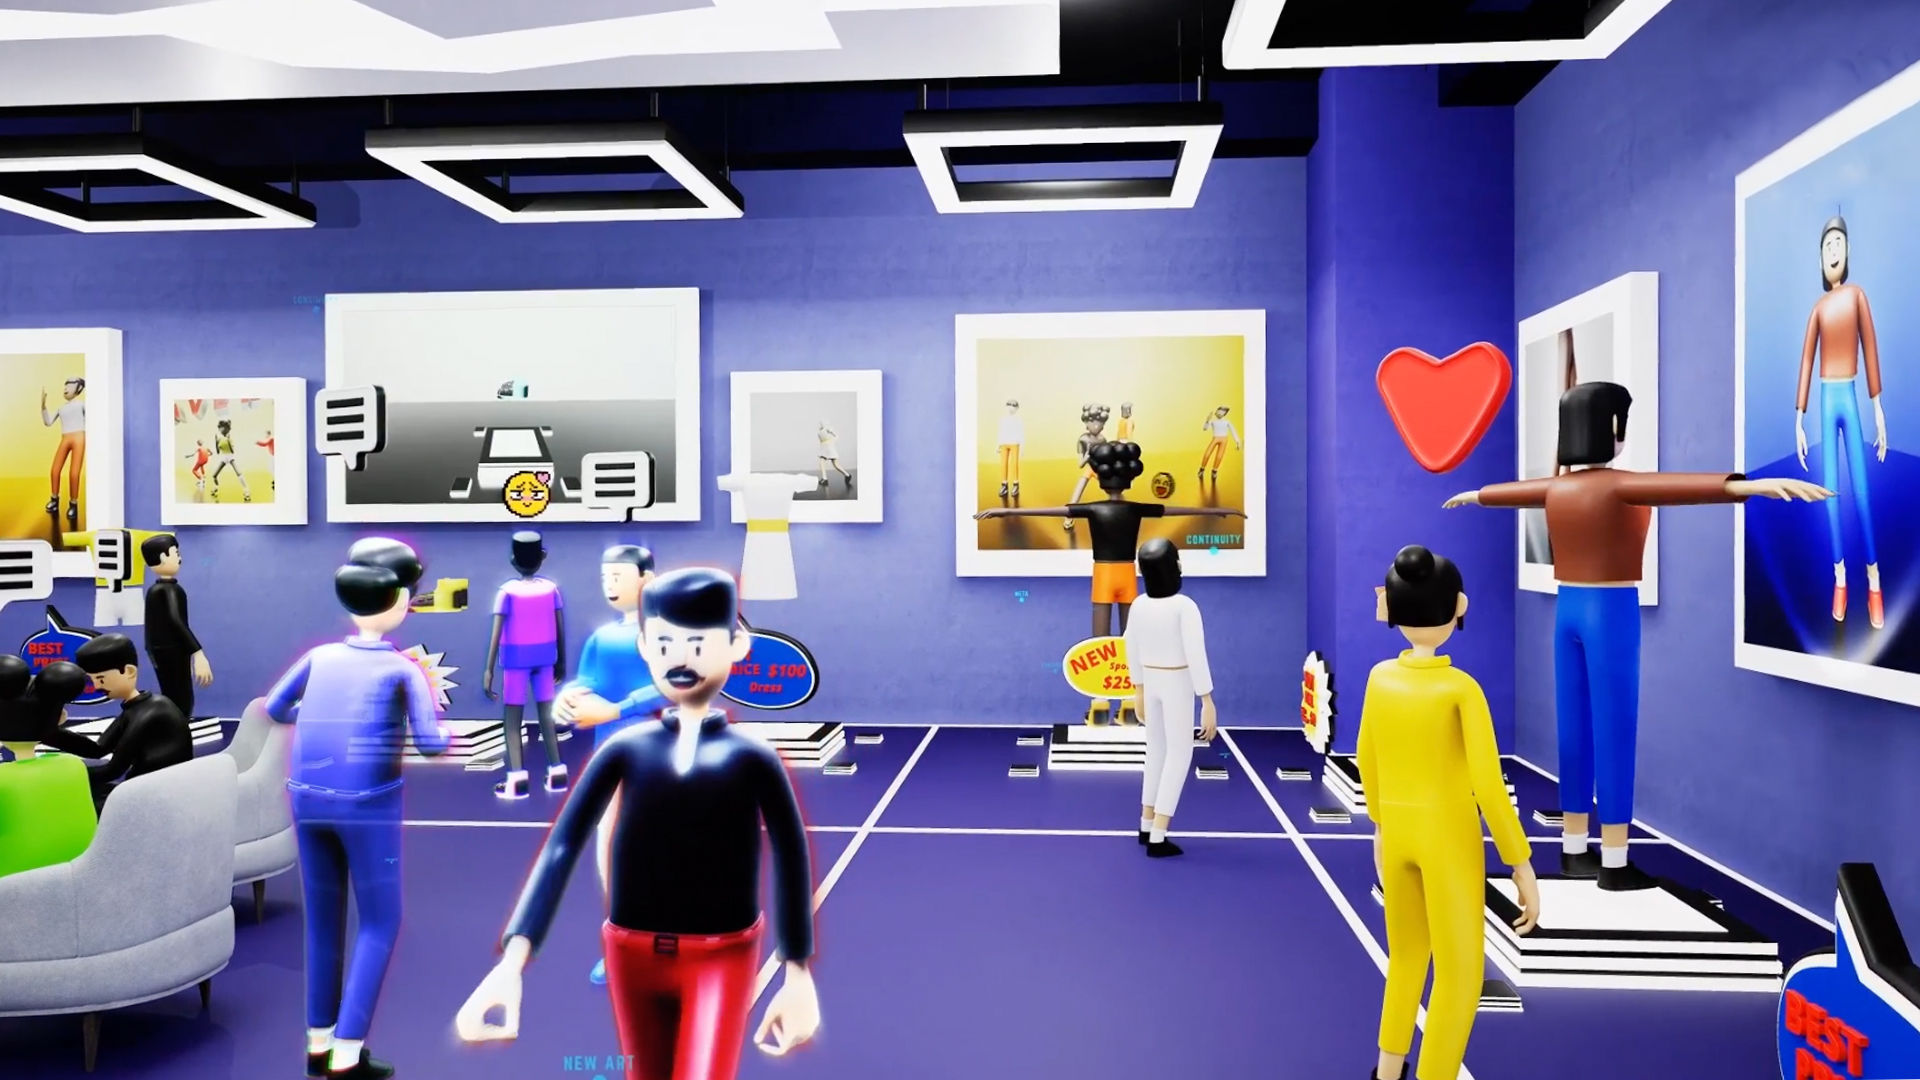 A screenshot from a VR application or something similar that represents what the metaverse would look like. There are several different avatars all doing different things.